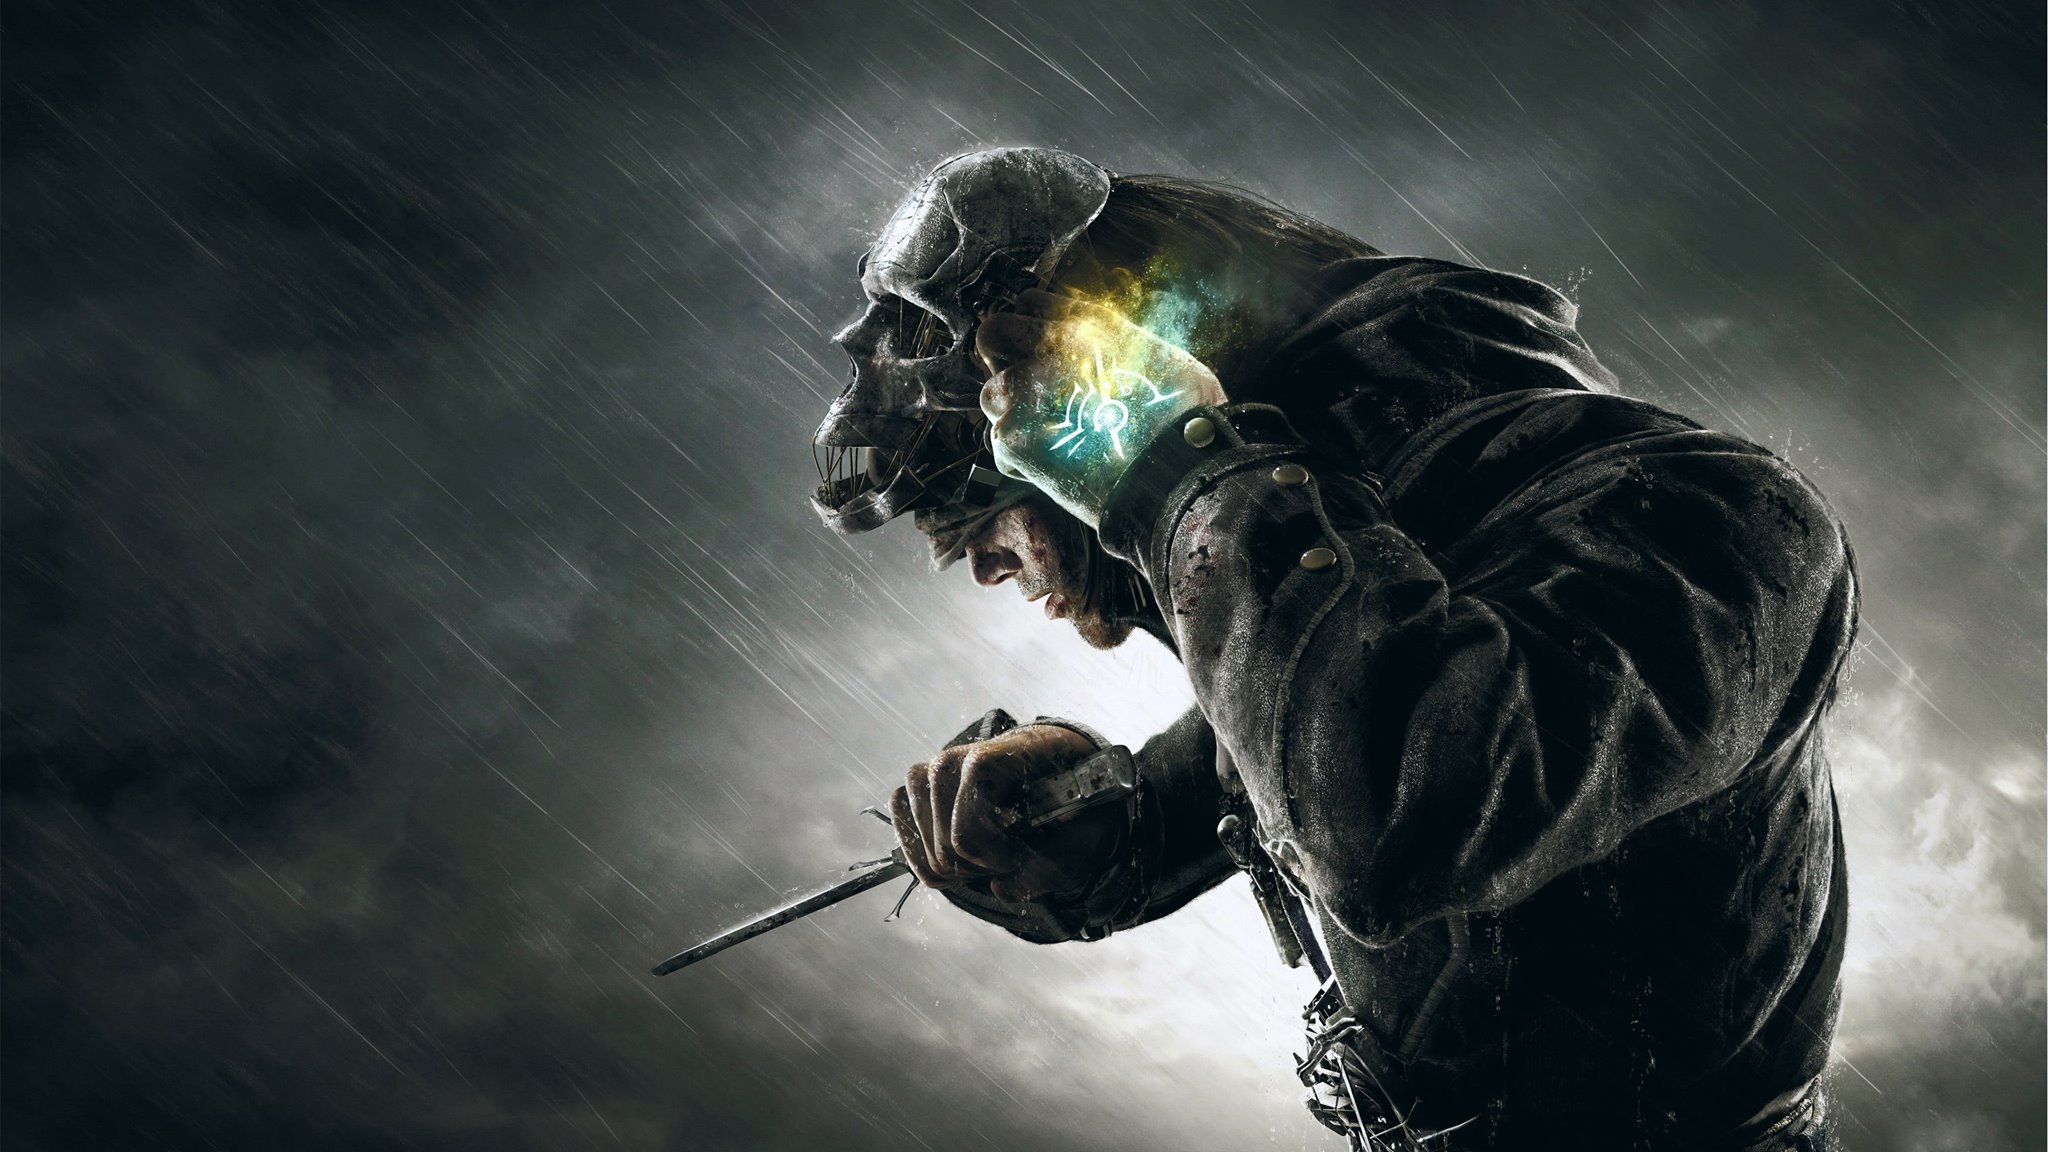 Dishonored 4k Wallpaper For Your Hot Gaming